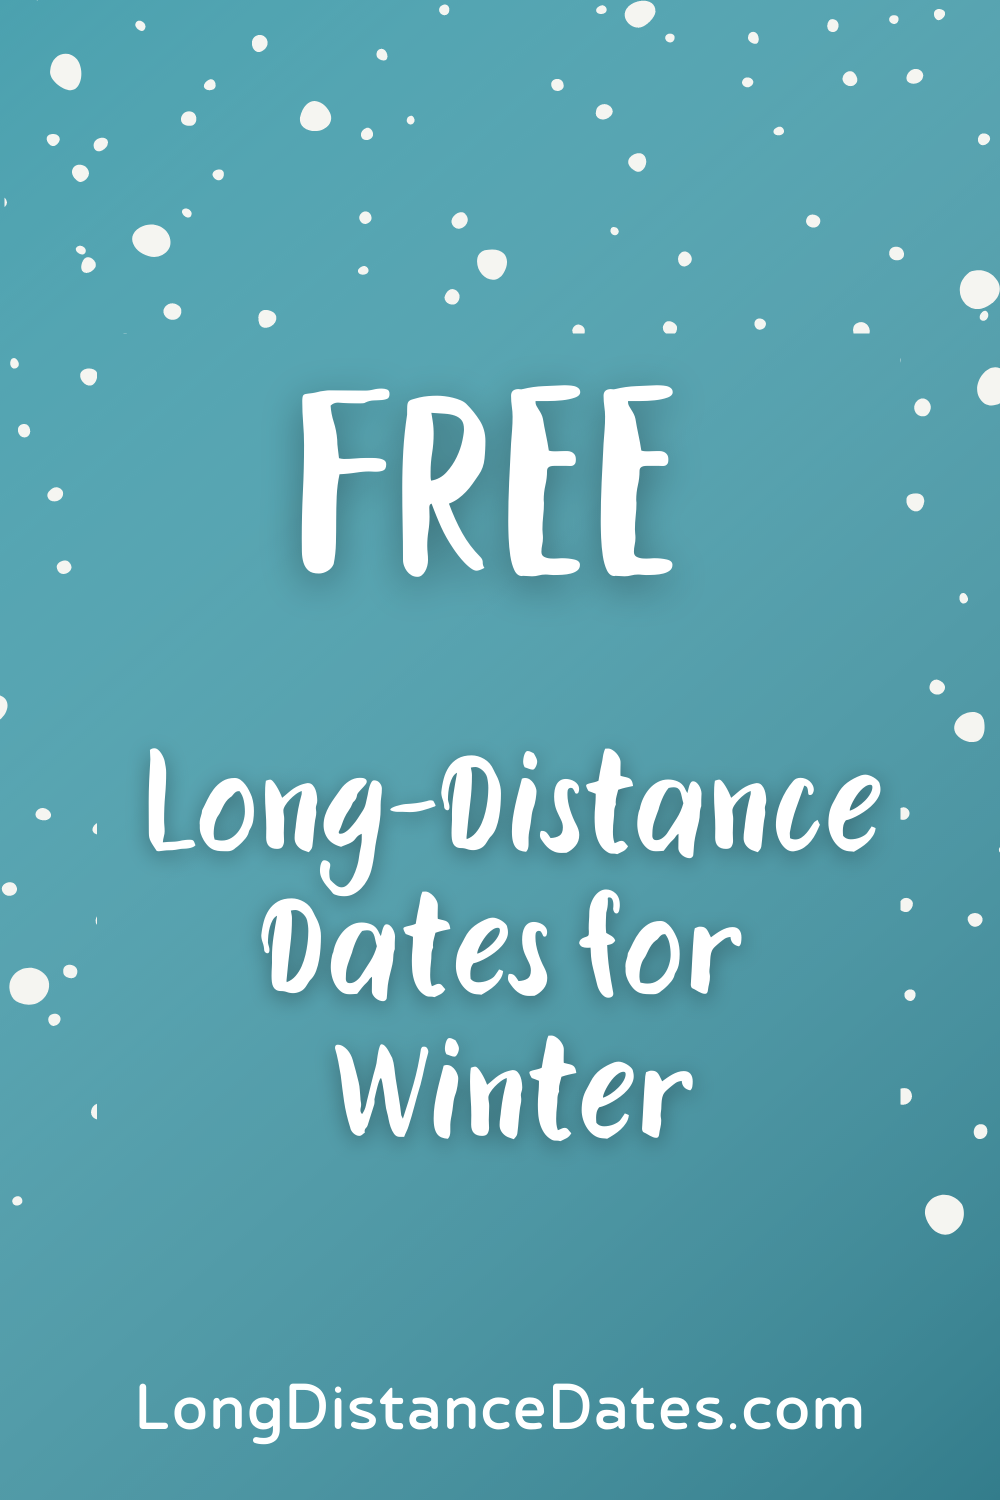 FREE online dates for LDR couples in winter